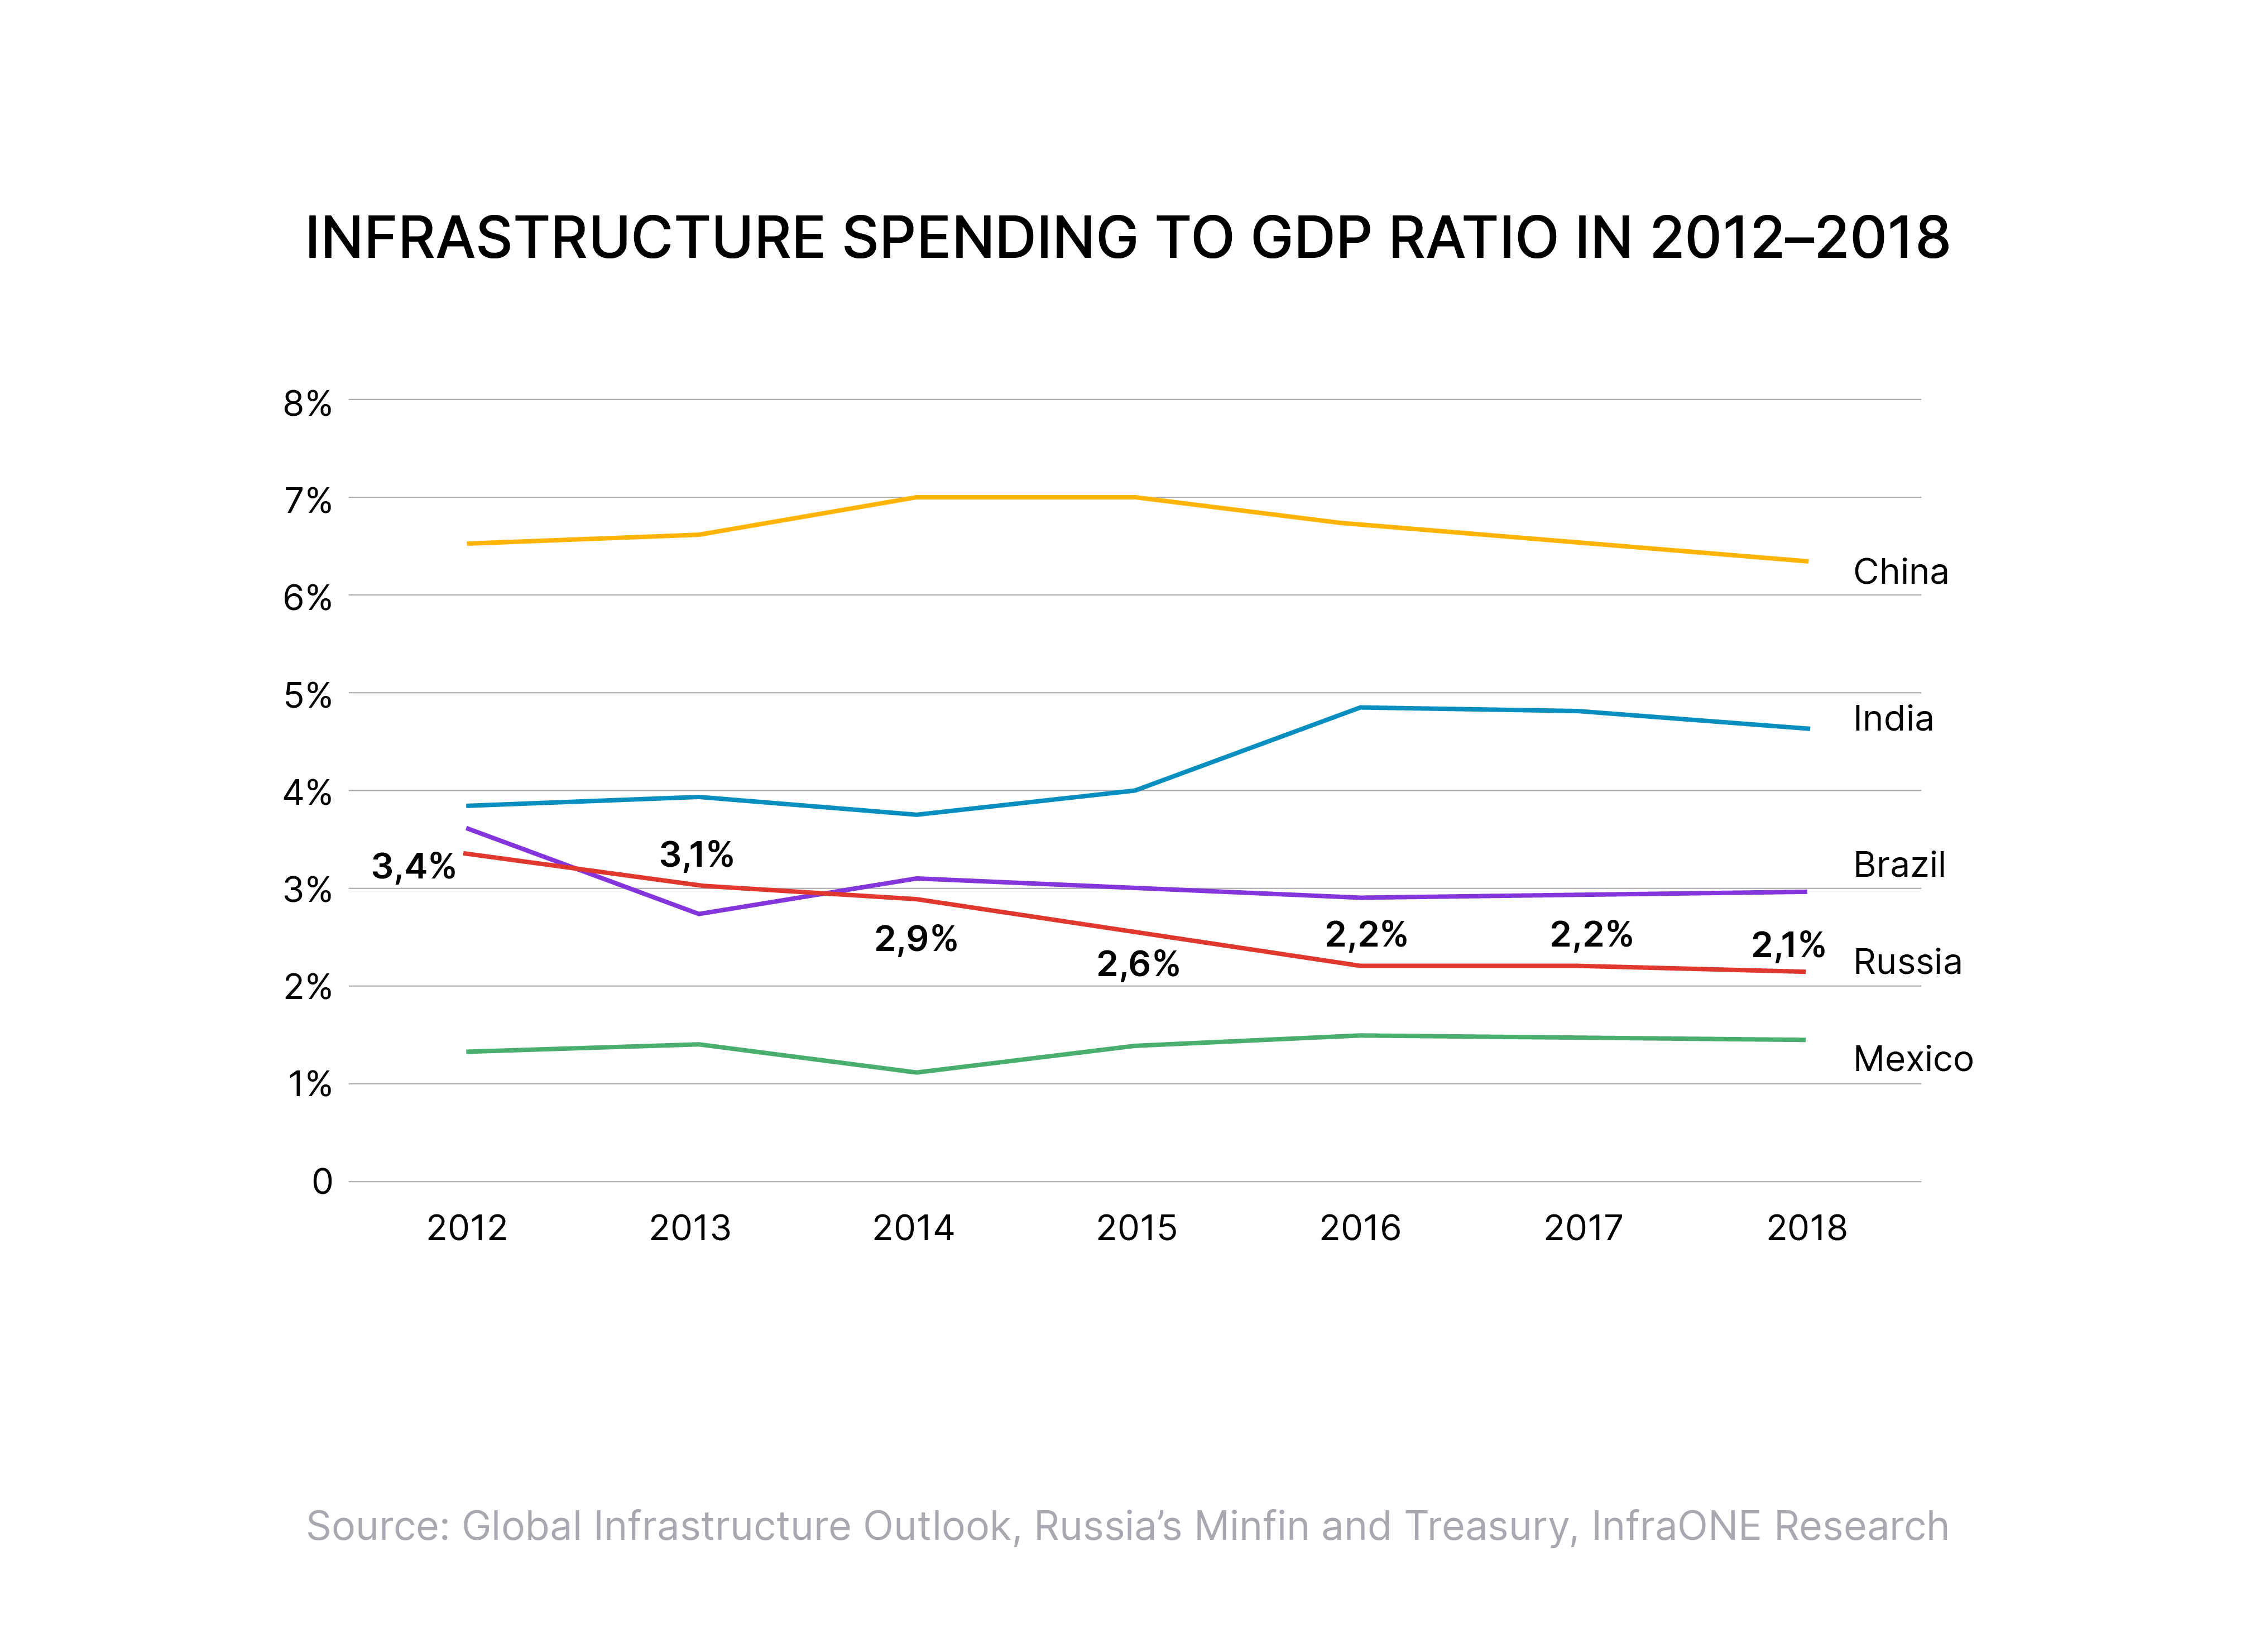 Infrastructure spending to GDP ratio in 2012 - 2018